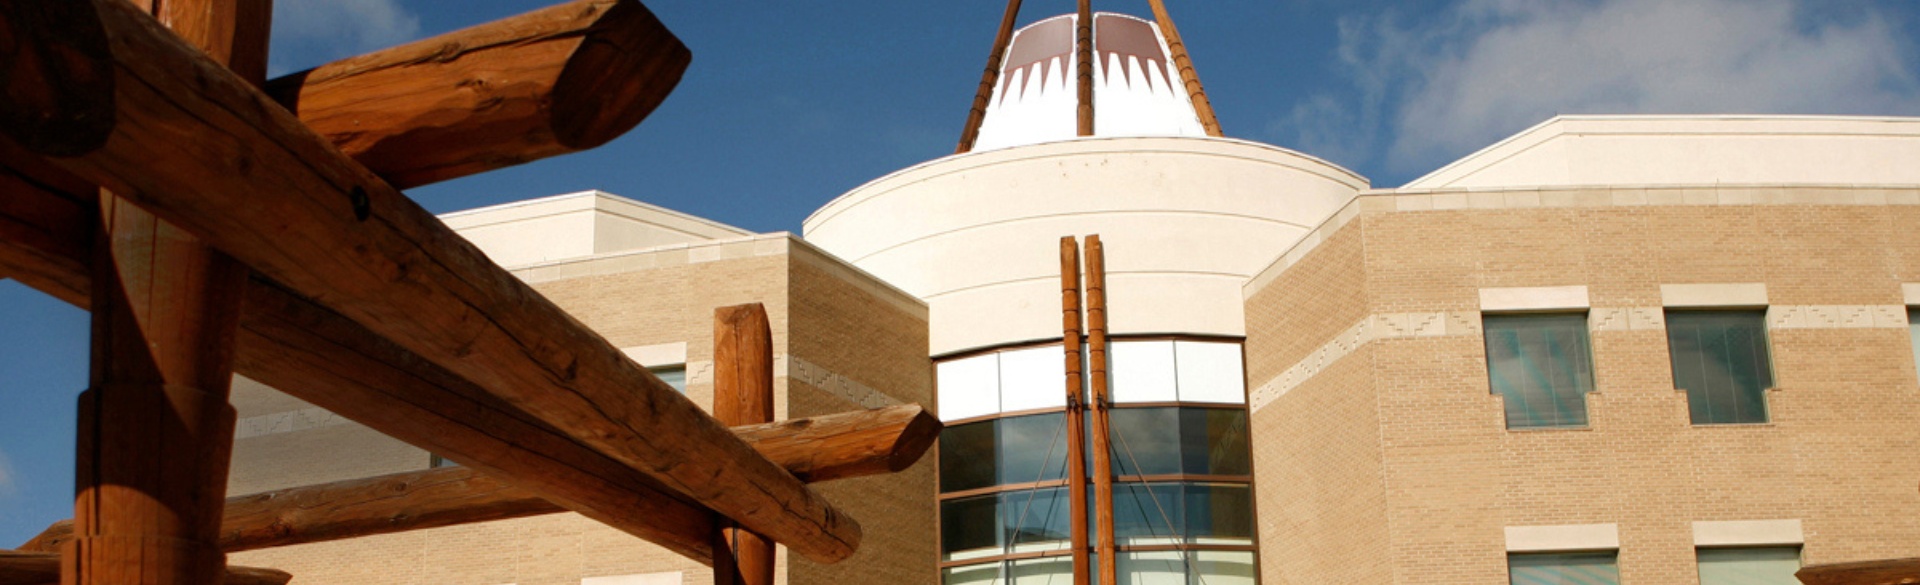 Centers for American Indian and Alaska Native Health building